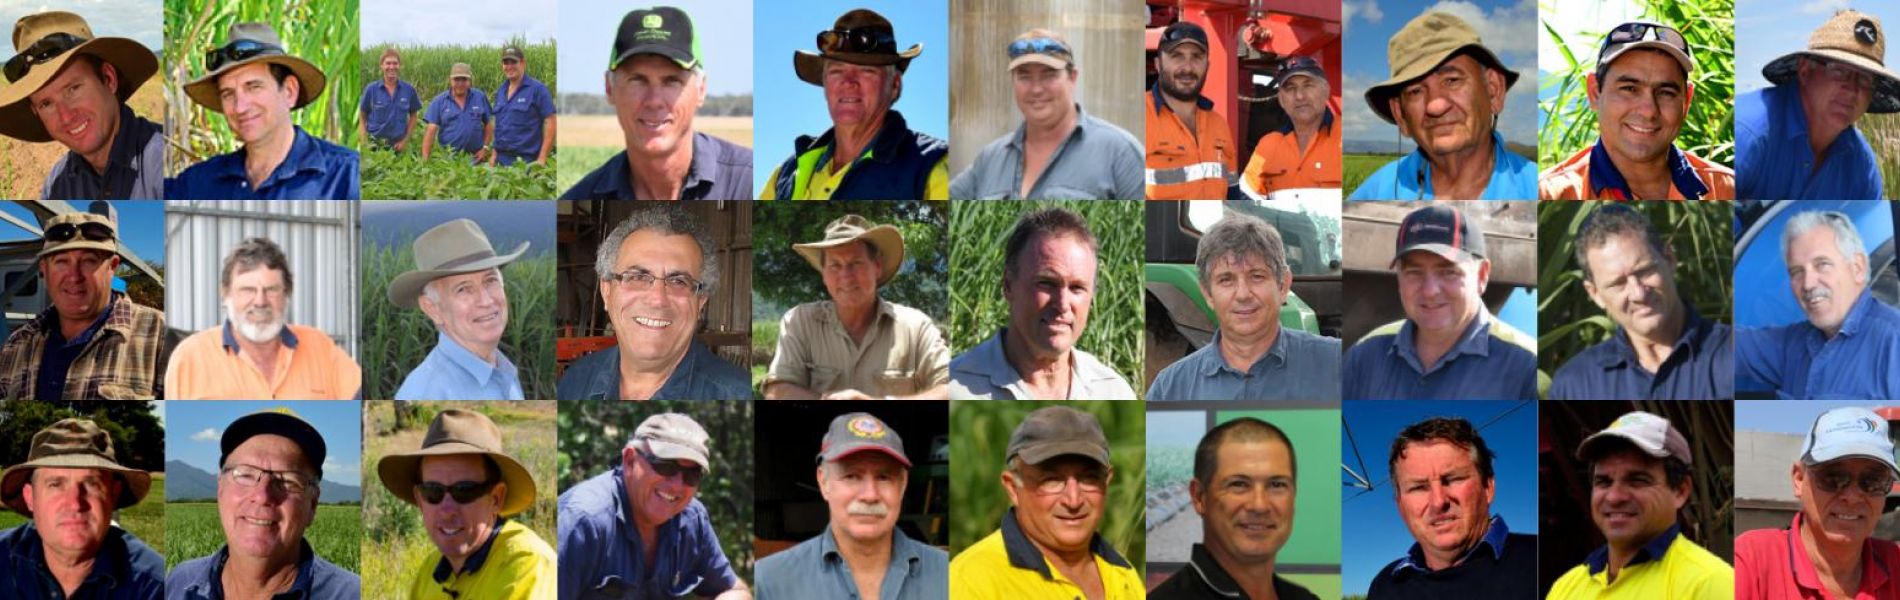 Our growers.    Our story